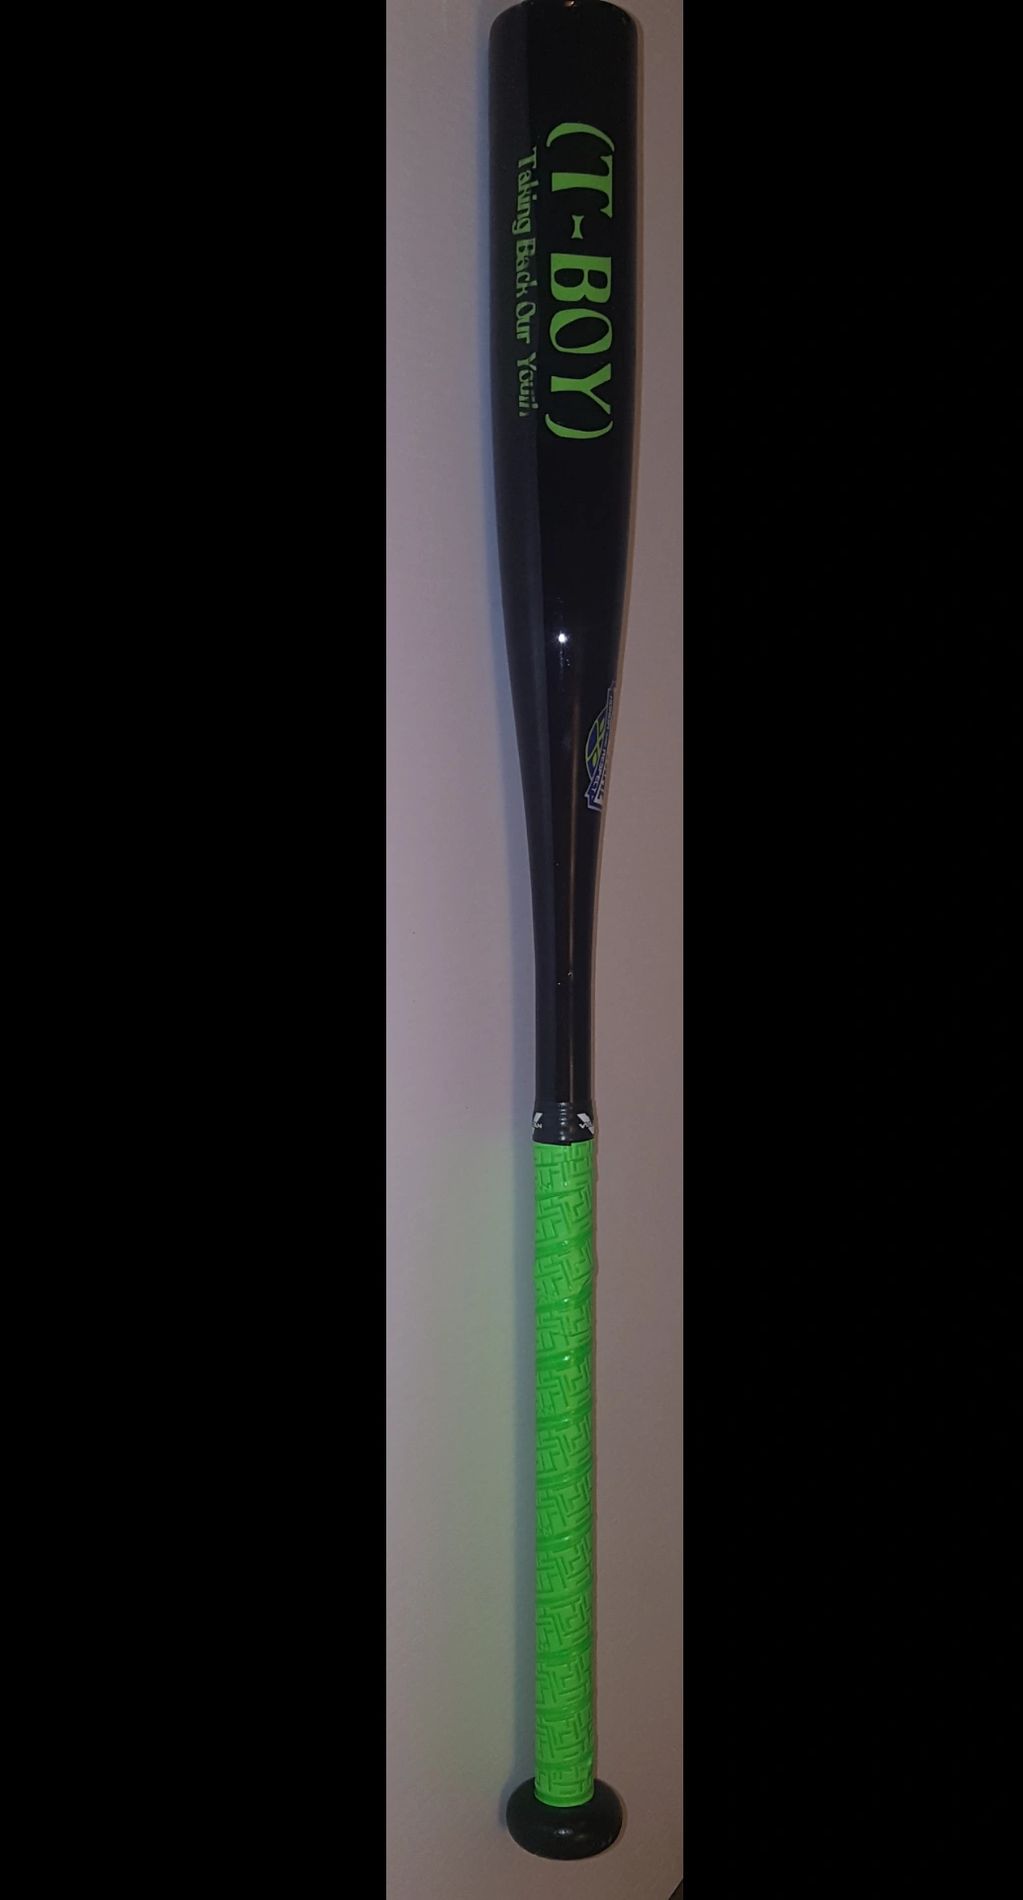 One baseball player will receive a bat like this with a $25,000 scholarship. One awarded each year!